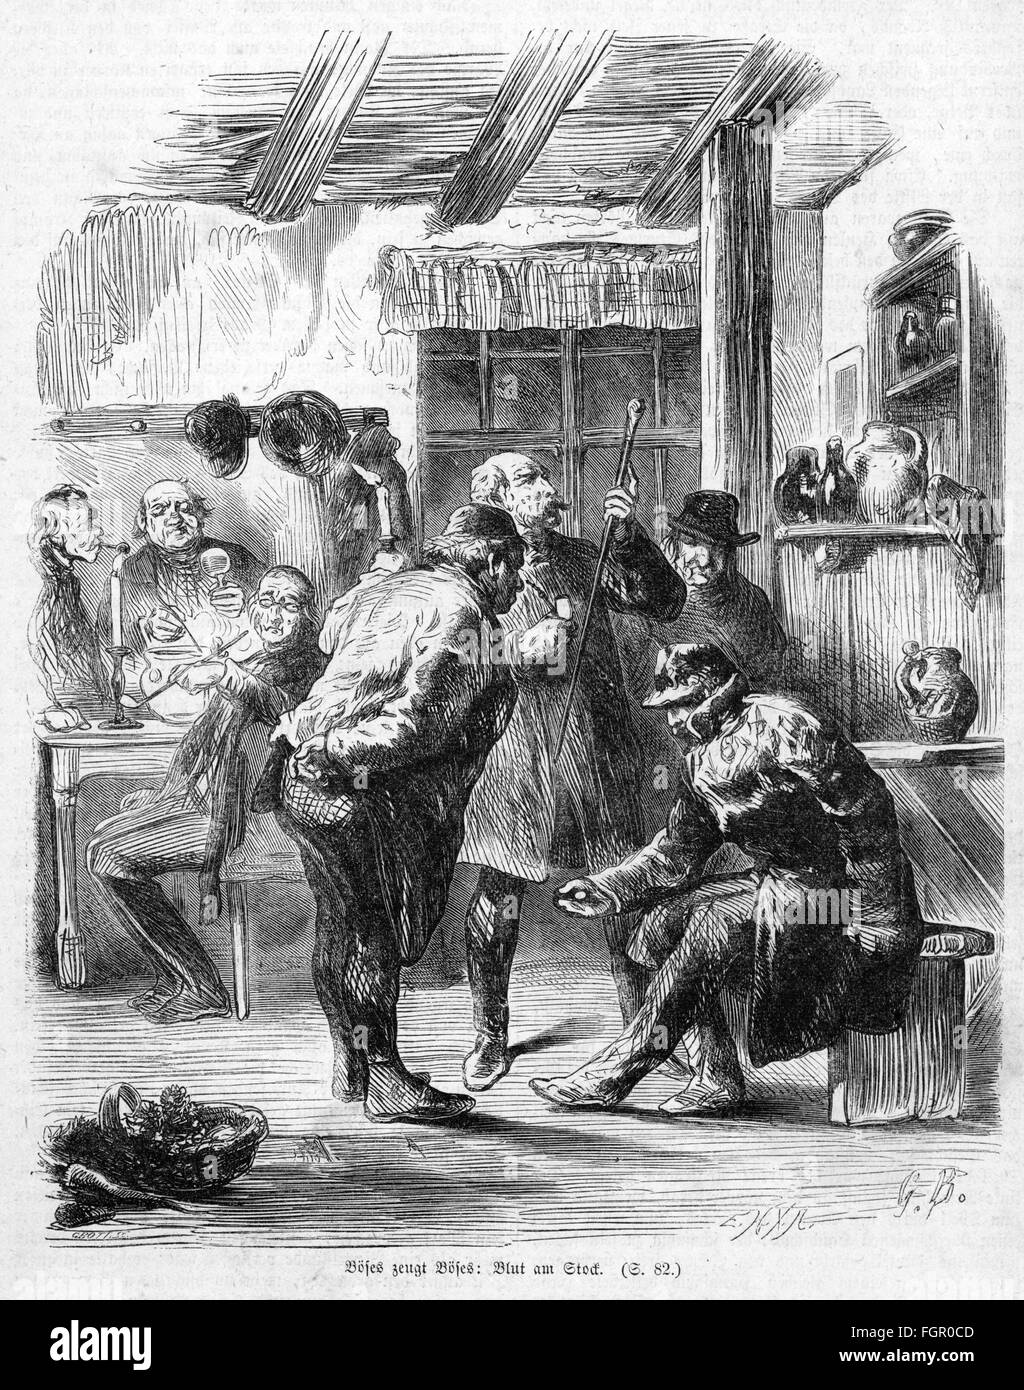 justice, crime, investigation of bloodstains on a cane, wood engraving, 19th century, 19th century, graphic, graphics, half length, standing, sitting, sit, restaurant, inn, inns, tavern, taverns, examining, examine, inquiry, investigations, on-the-spot investigation, make inquiries, investigating, investigate, investigative, investigatory, fact-finding, blood, crime, offence, offense, crimes, offences, offenses, cane, canes, bloodstain, blood stain, bloodstains, crime, historic, historical, male, man, men, people, Additional-Rights-Clearences-Not Available Stock Photo